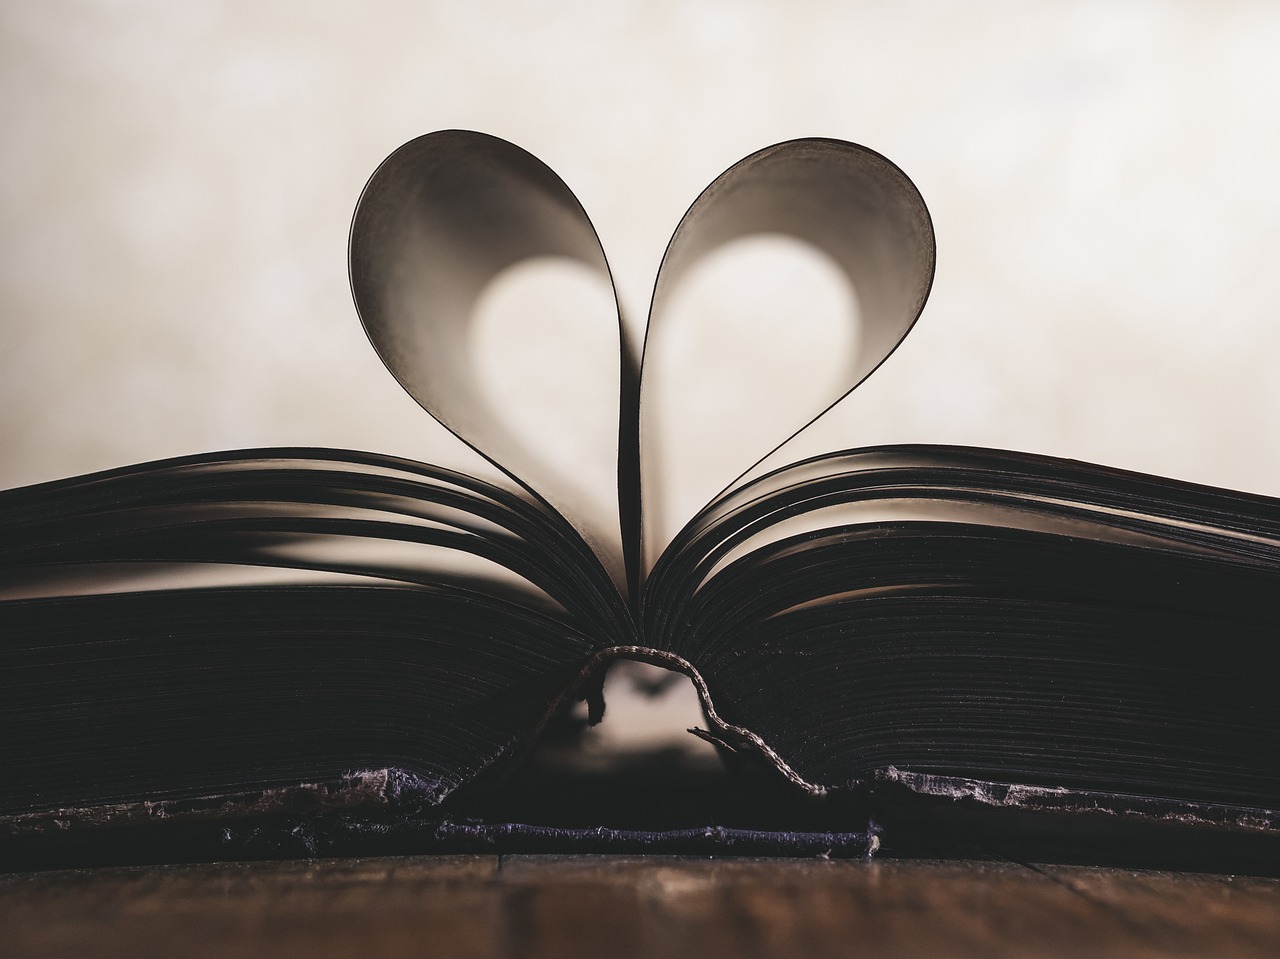 Image of a book with the pages shaped like a heart.